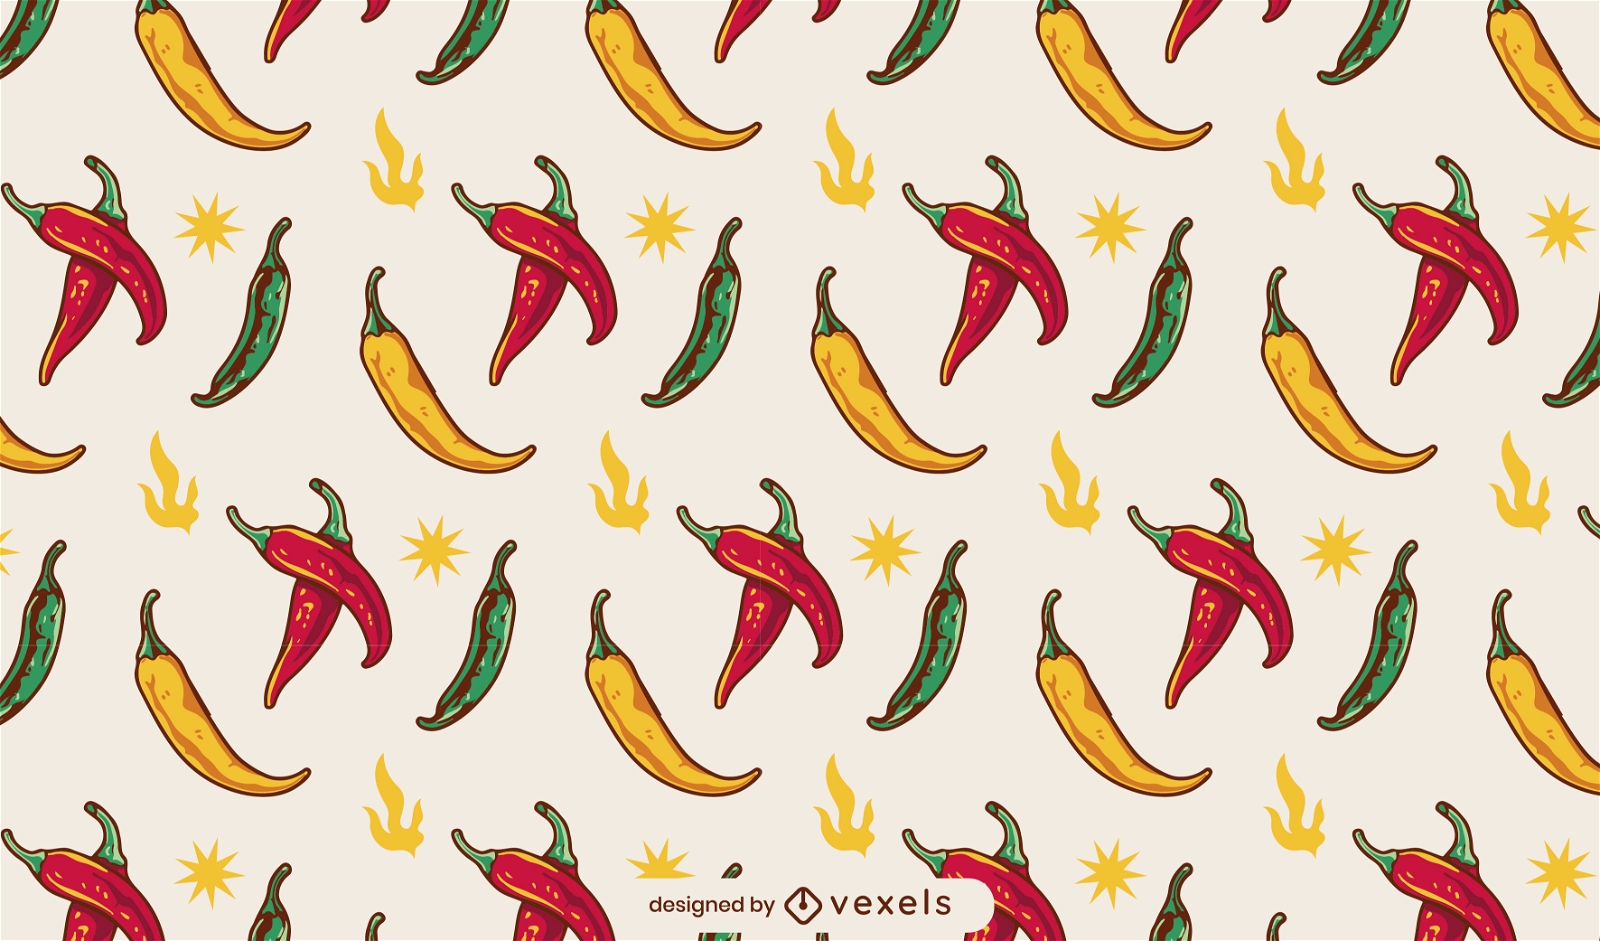 Chili peppers pattern design